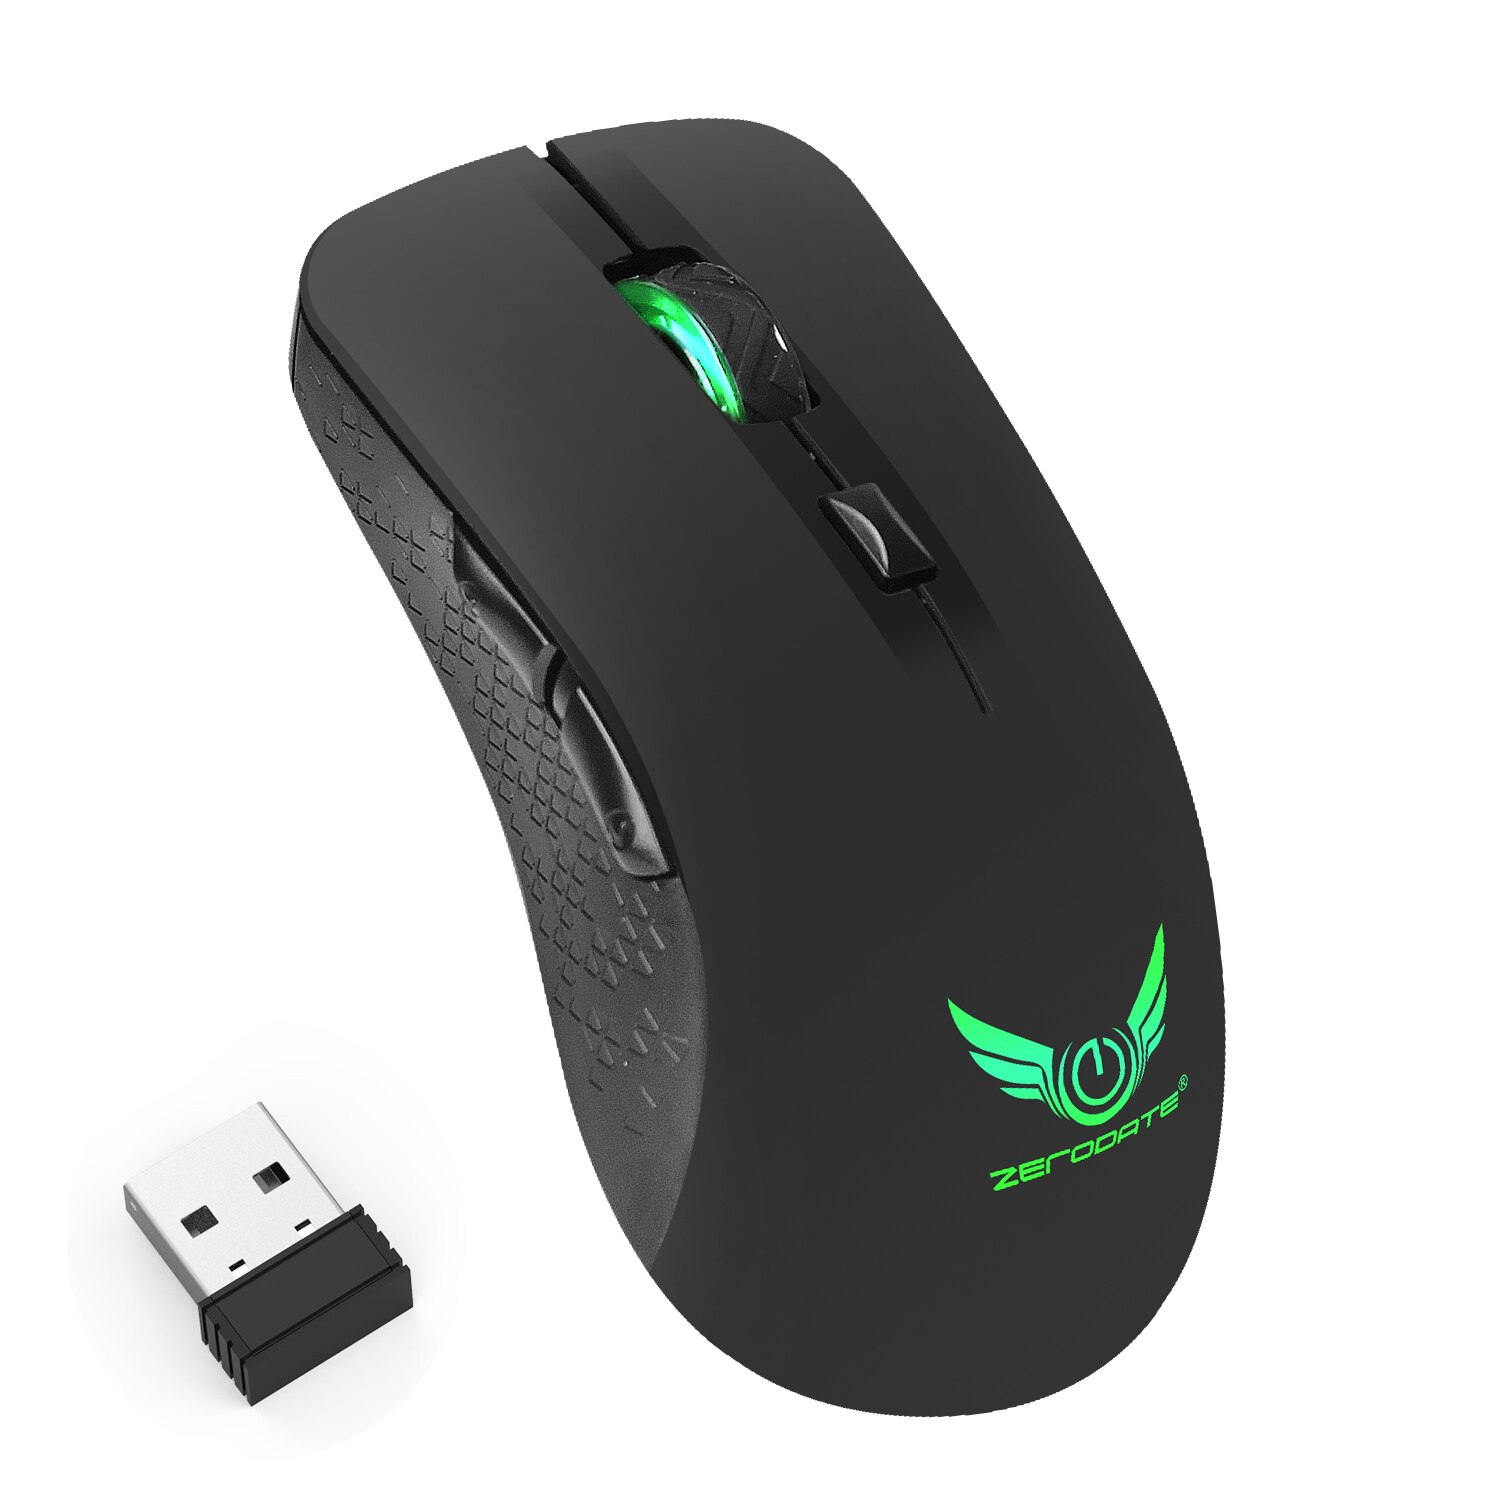 HXSJ M10 Wireless Gaming Mouse 2400dpi Rechargeable 7 color Backlight Breathing Comfort Gamer Mice for Computer Desktop Laptop: X90B